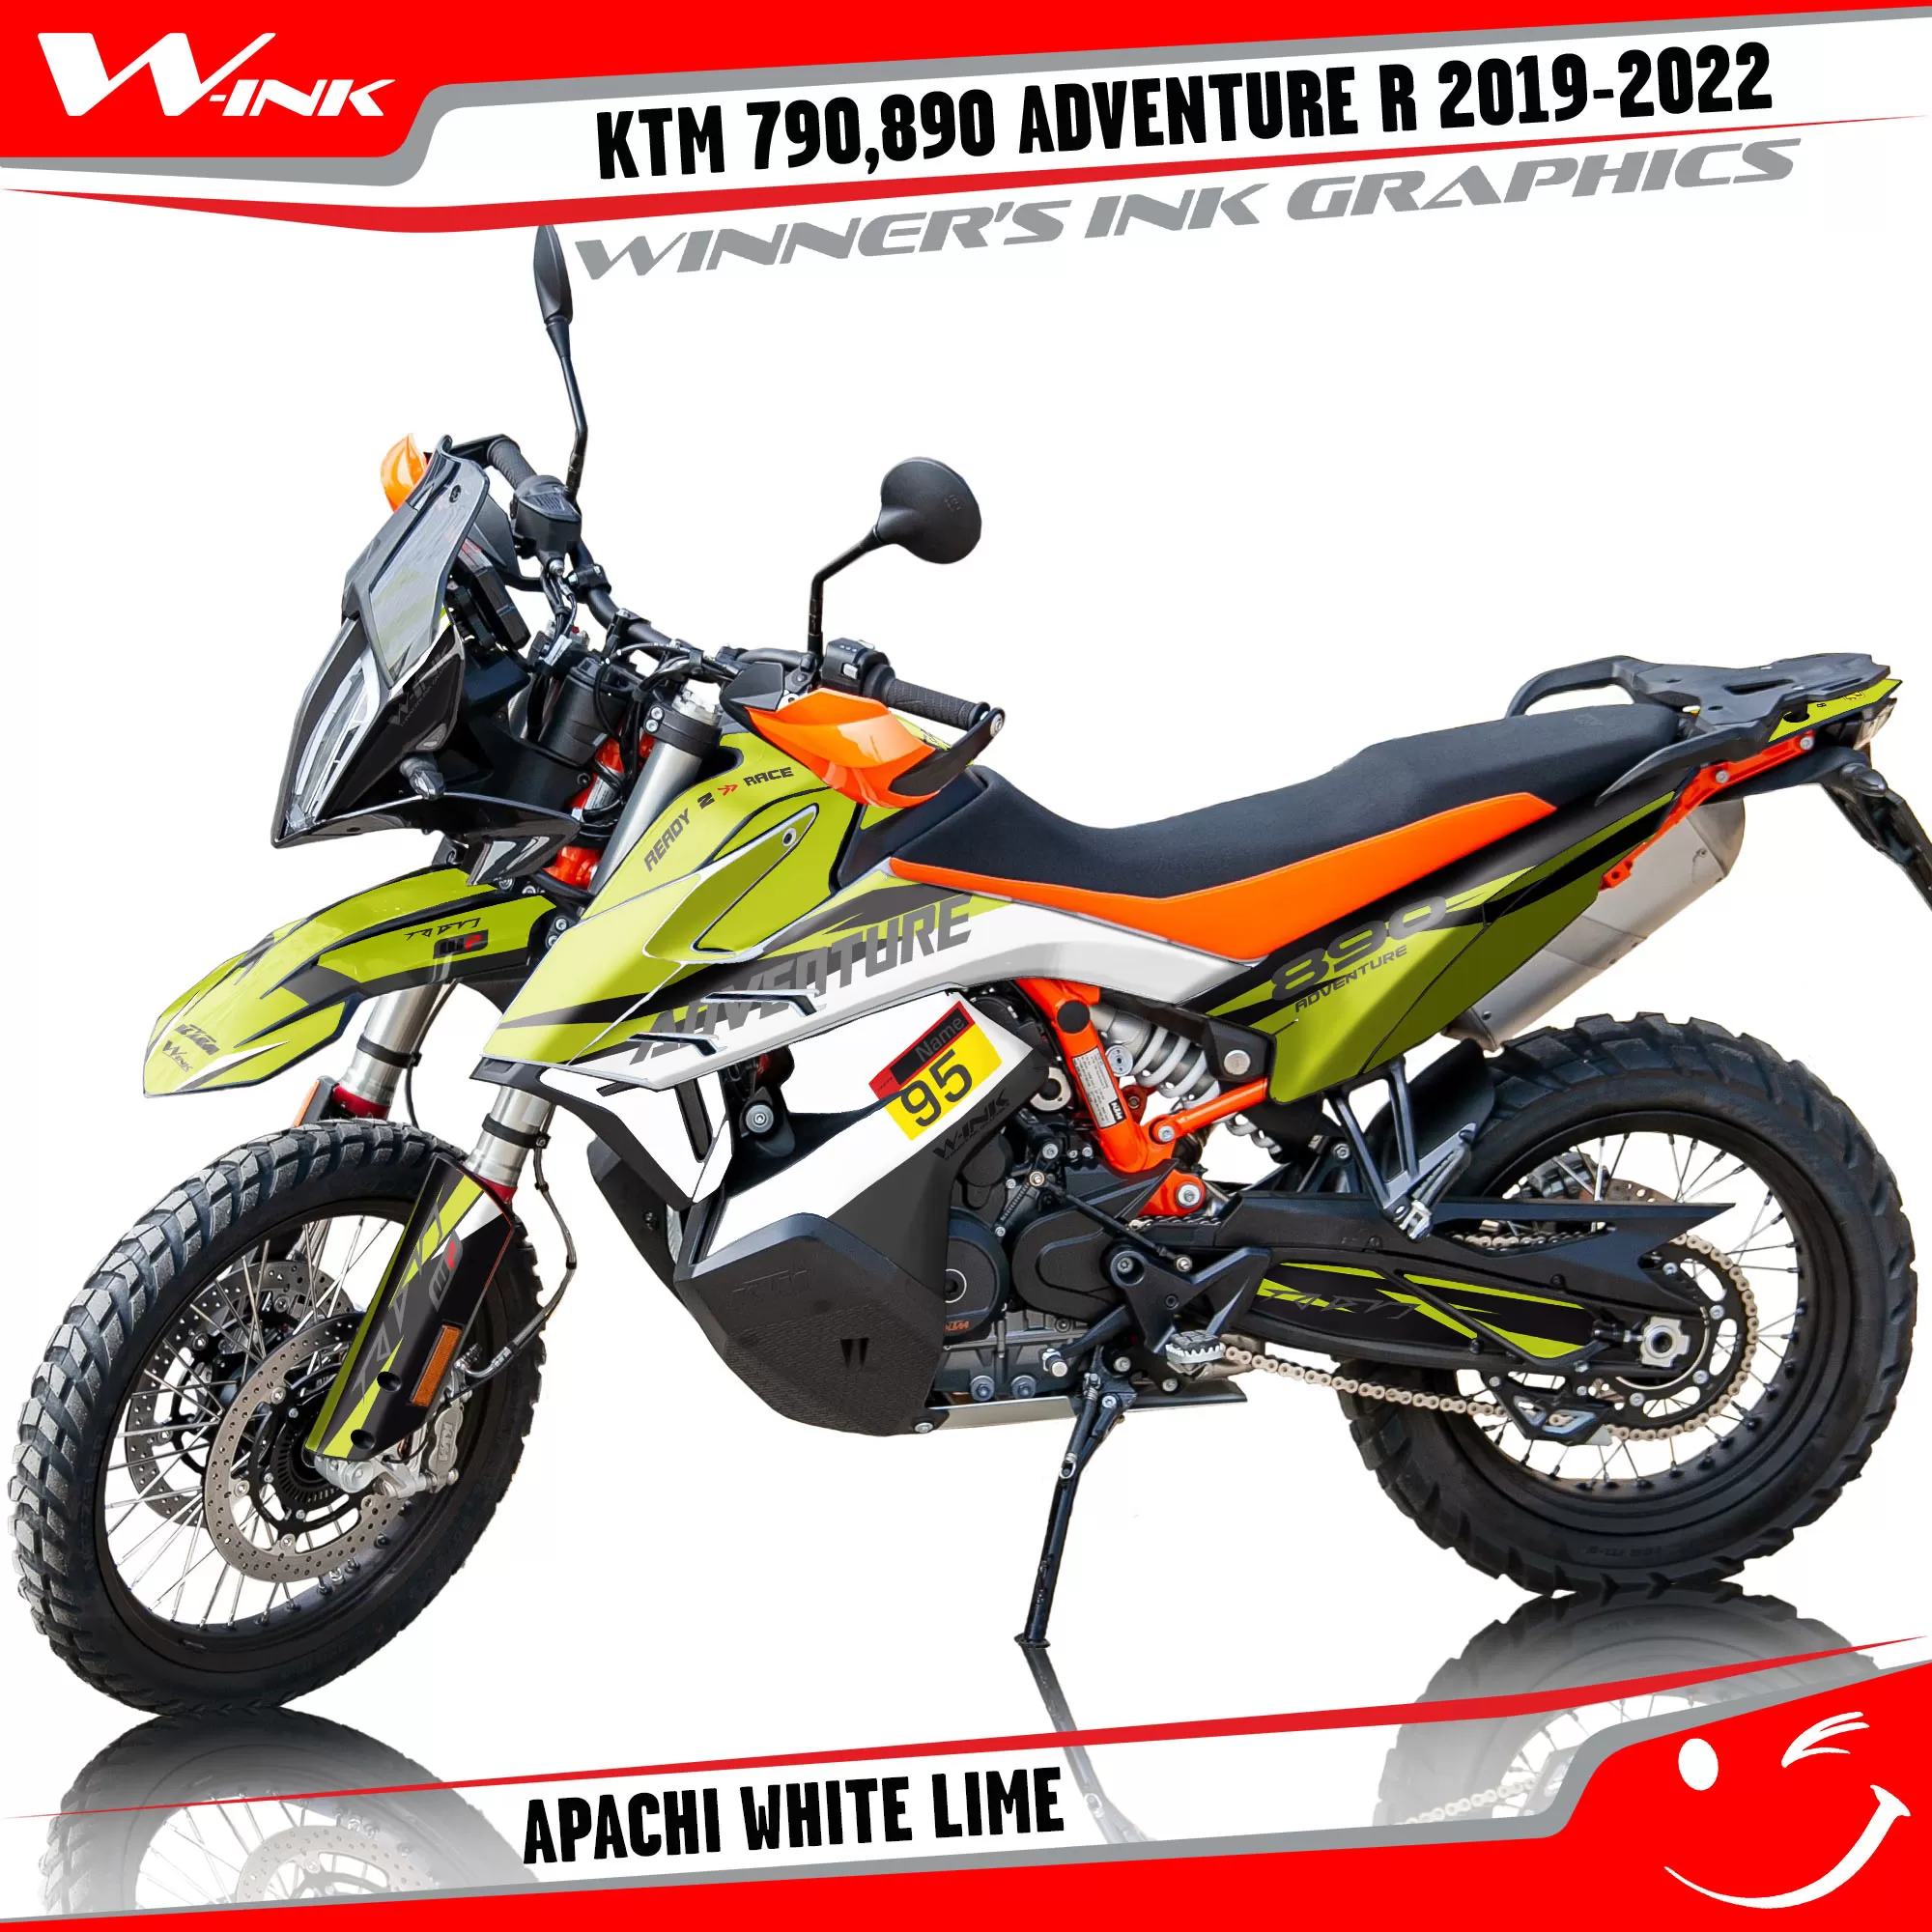 Adventure-R-790-890-2019-2020-2021-2022-graphics-kit-and-decals-with-designs-Apachi-White-Lime